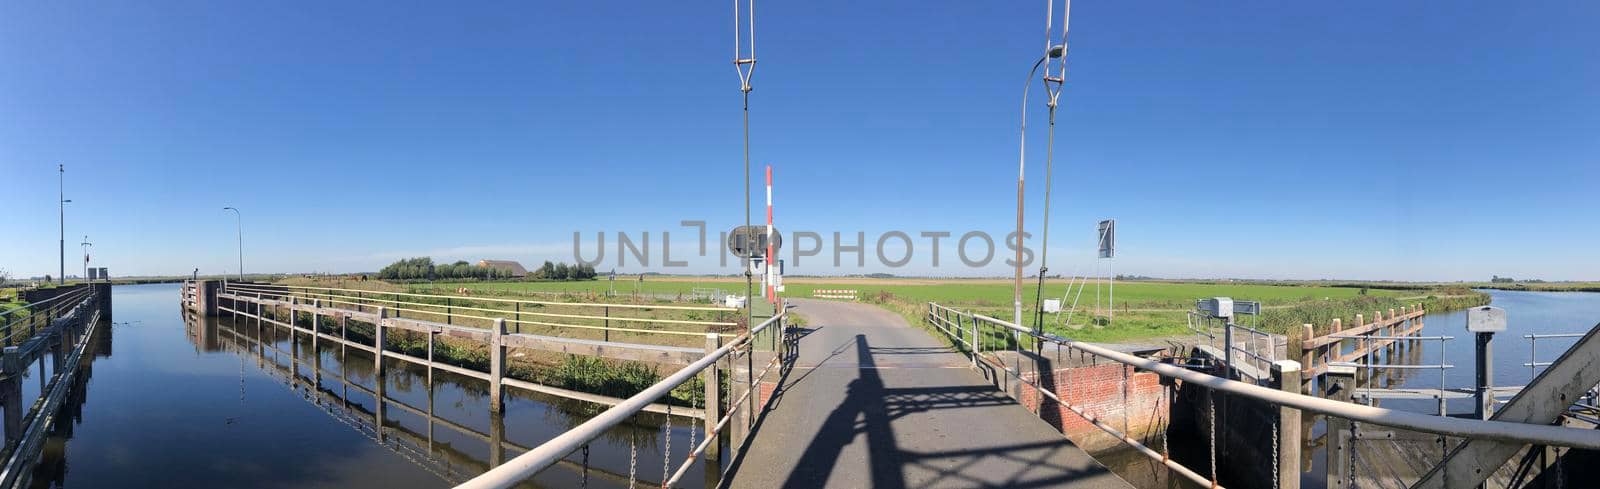 Panorama from a canal lock in Electra by traveltelly